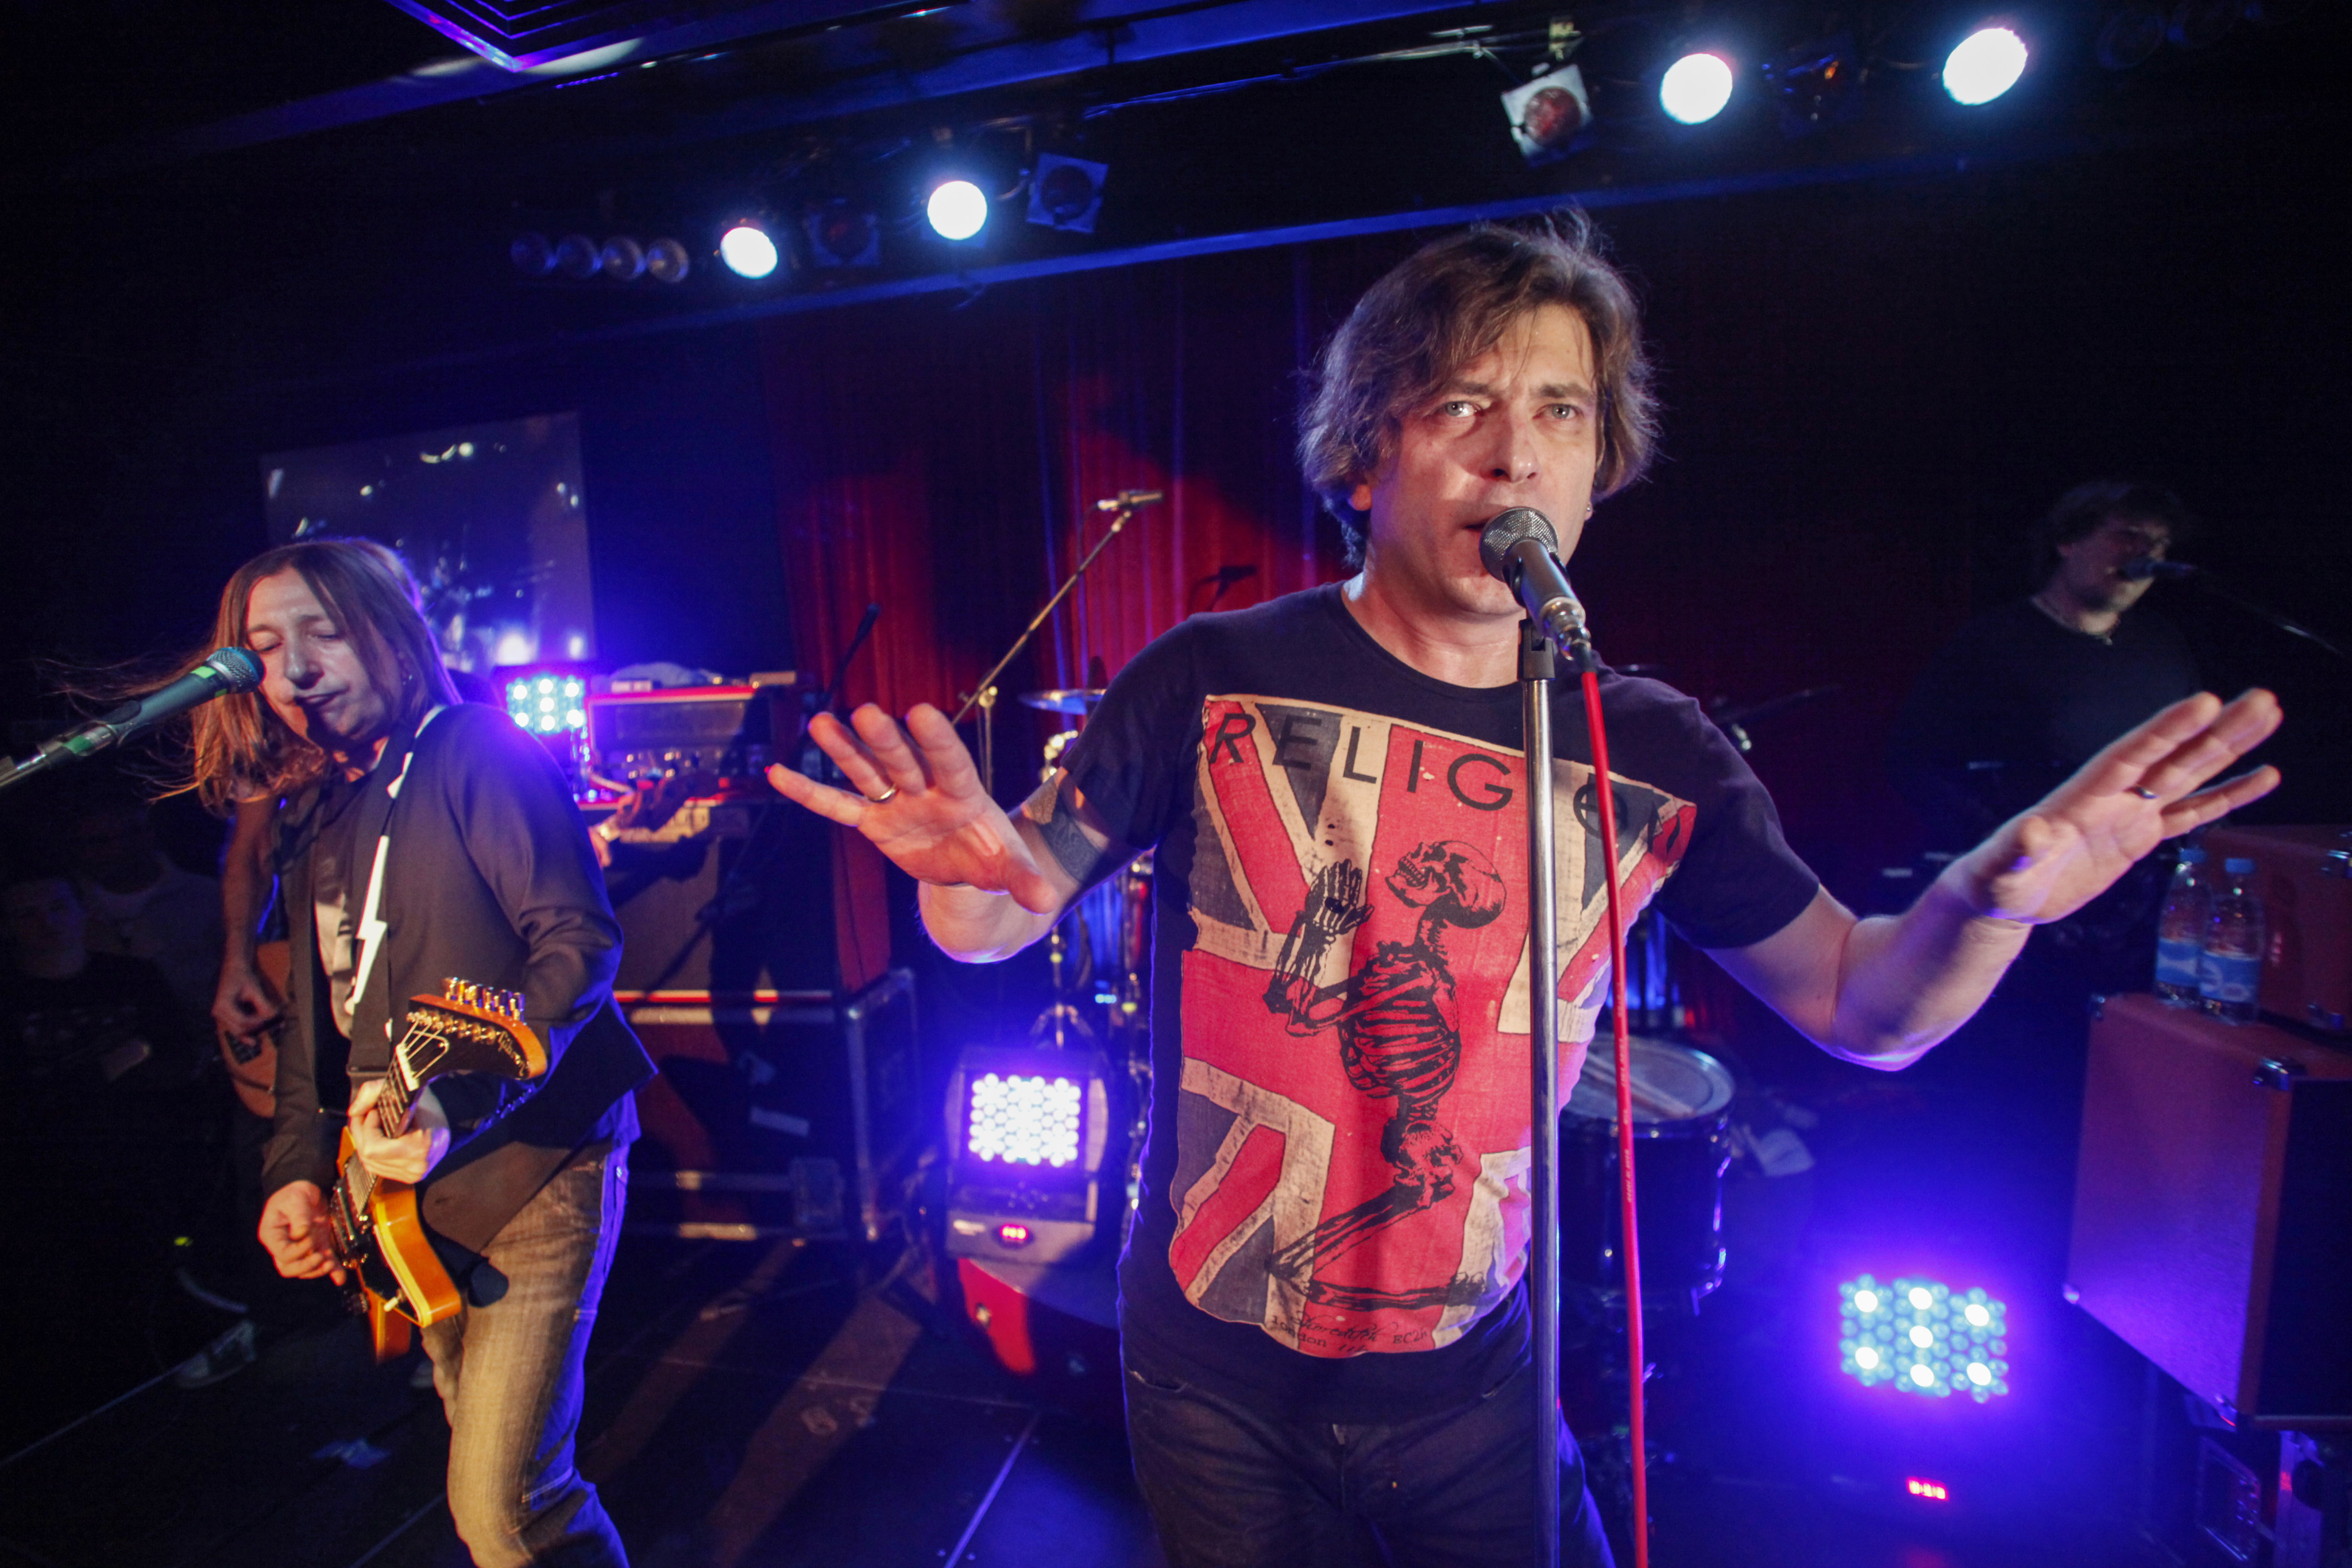 Members of the Bi-2 rock band perform at a concert in Moscow. File photo: AP